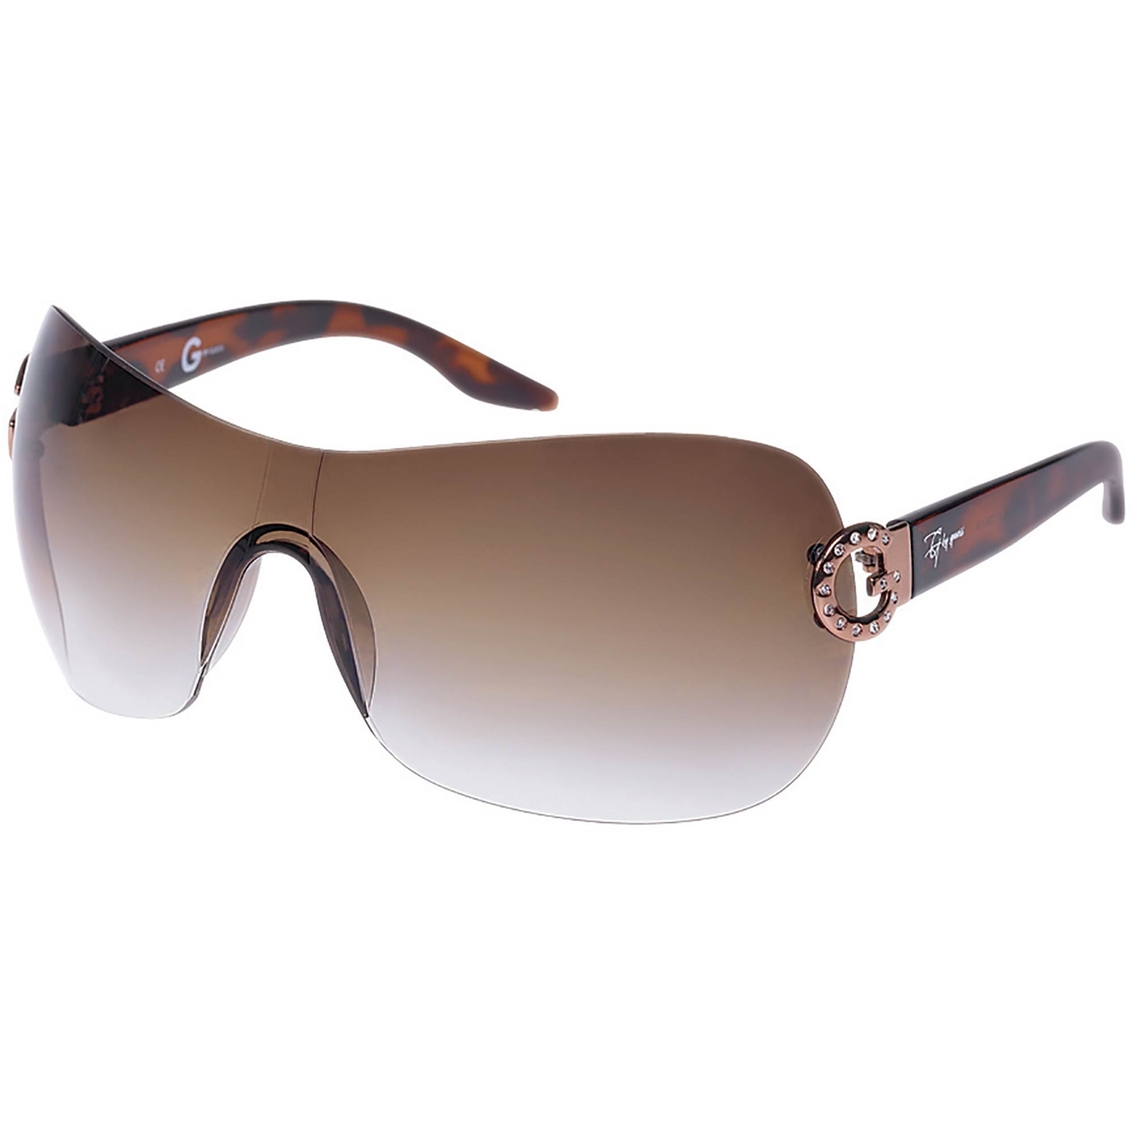 Guess Metal Shield Polycarbonate Sunglasses Gg 1020 | Atg Archive ...